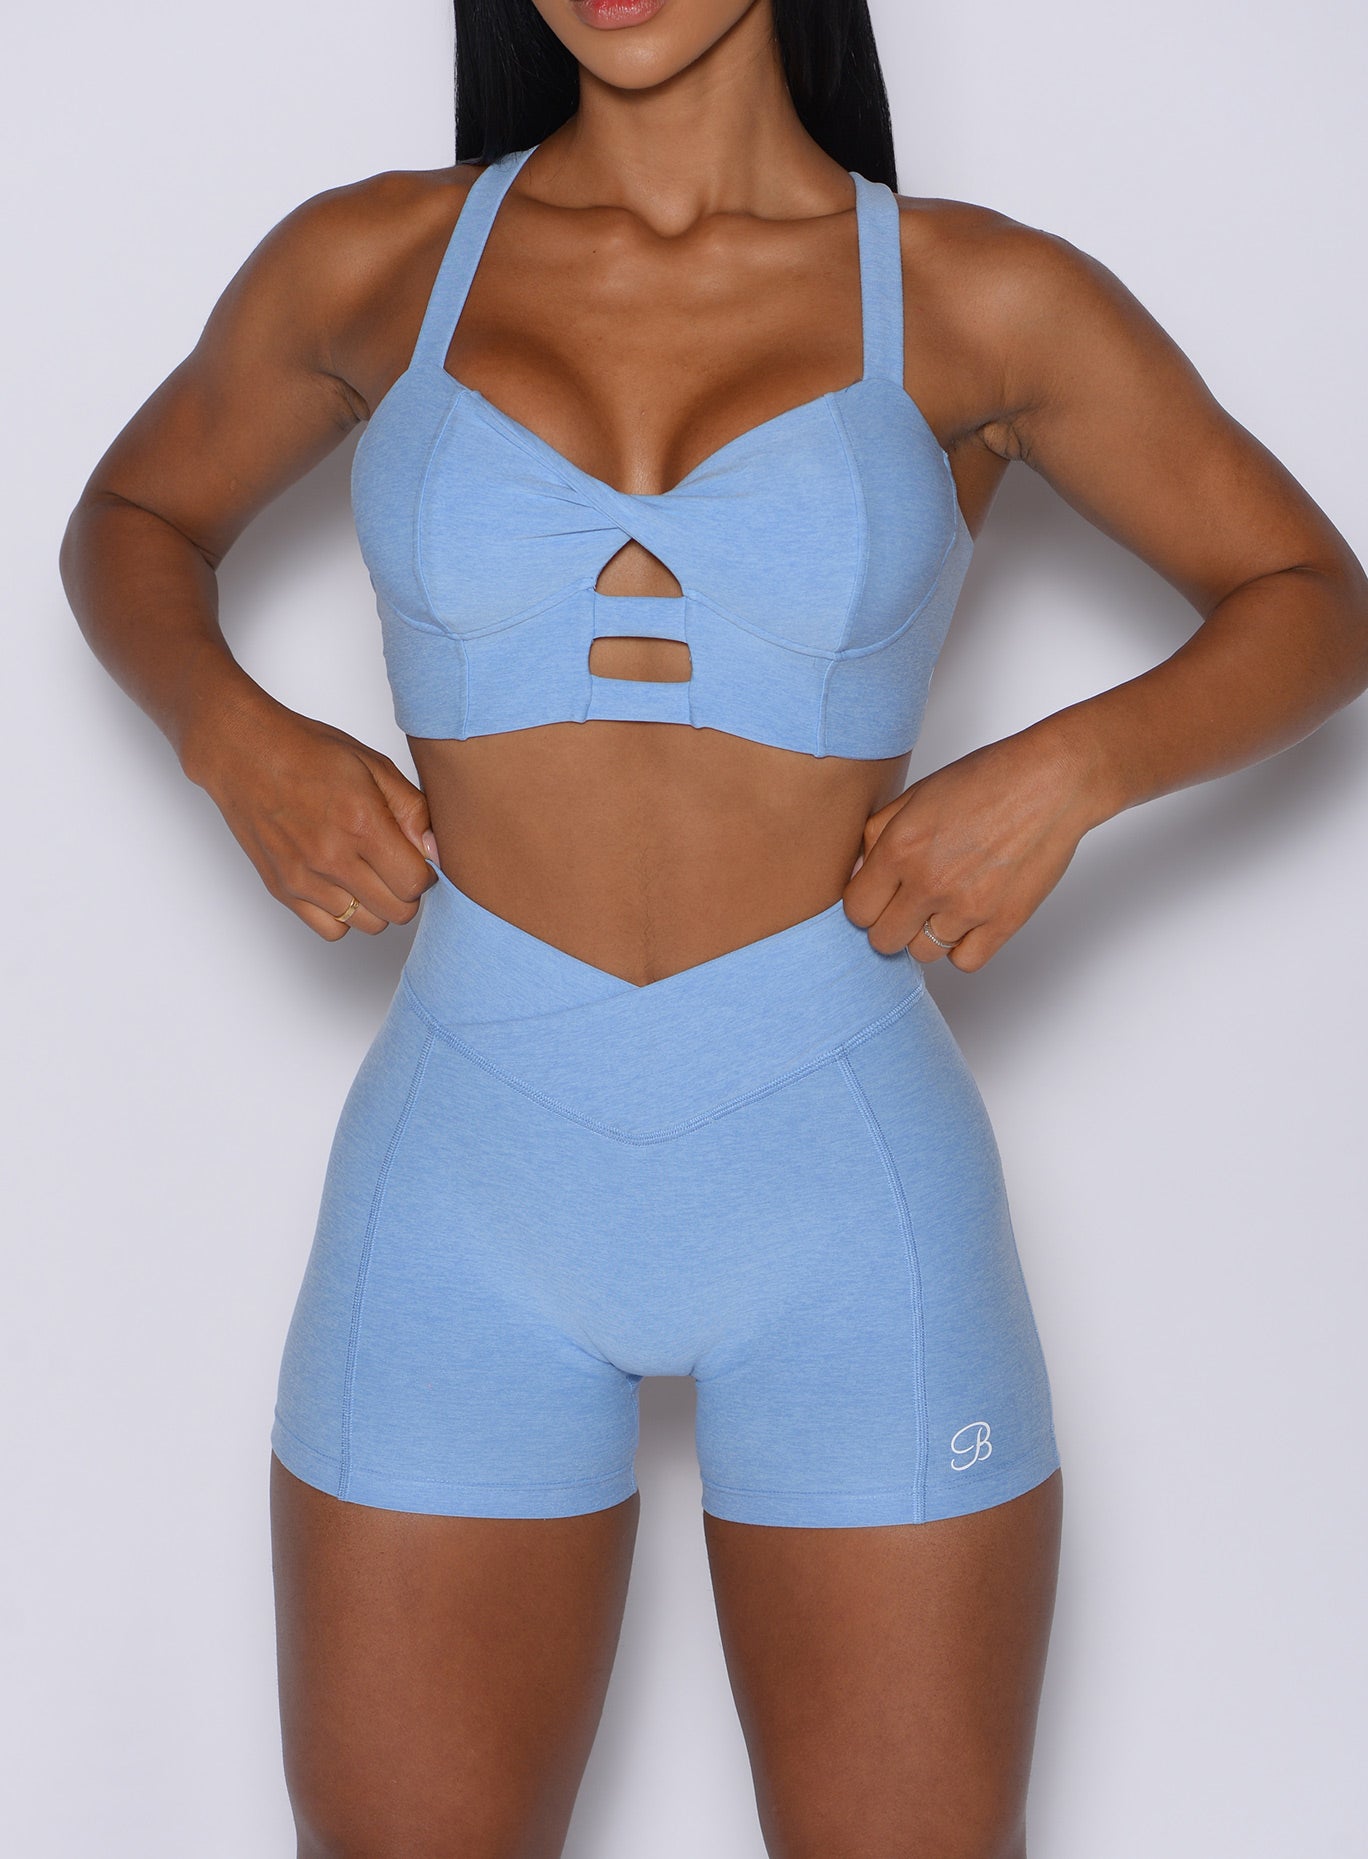 Model facing forward wearing our Tiny Waist Shorts in Bright Hydrangea color and a matching sports bra